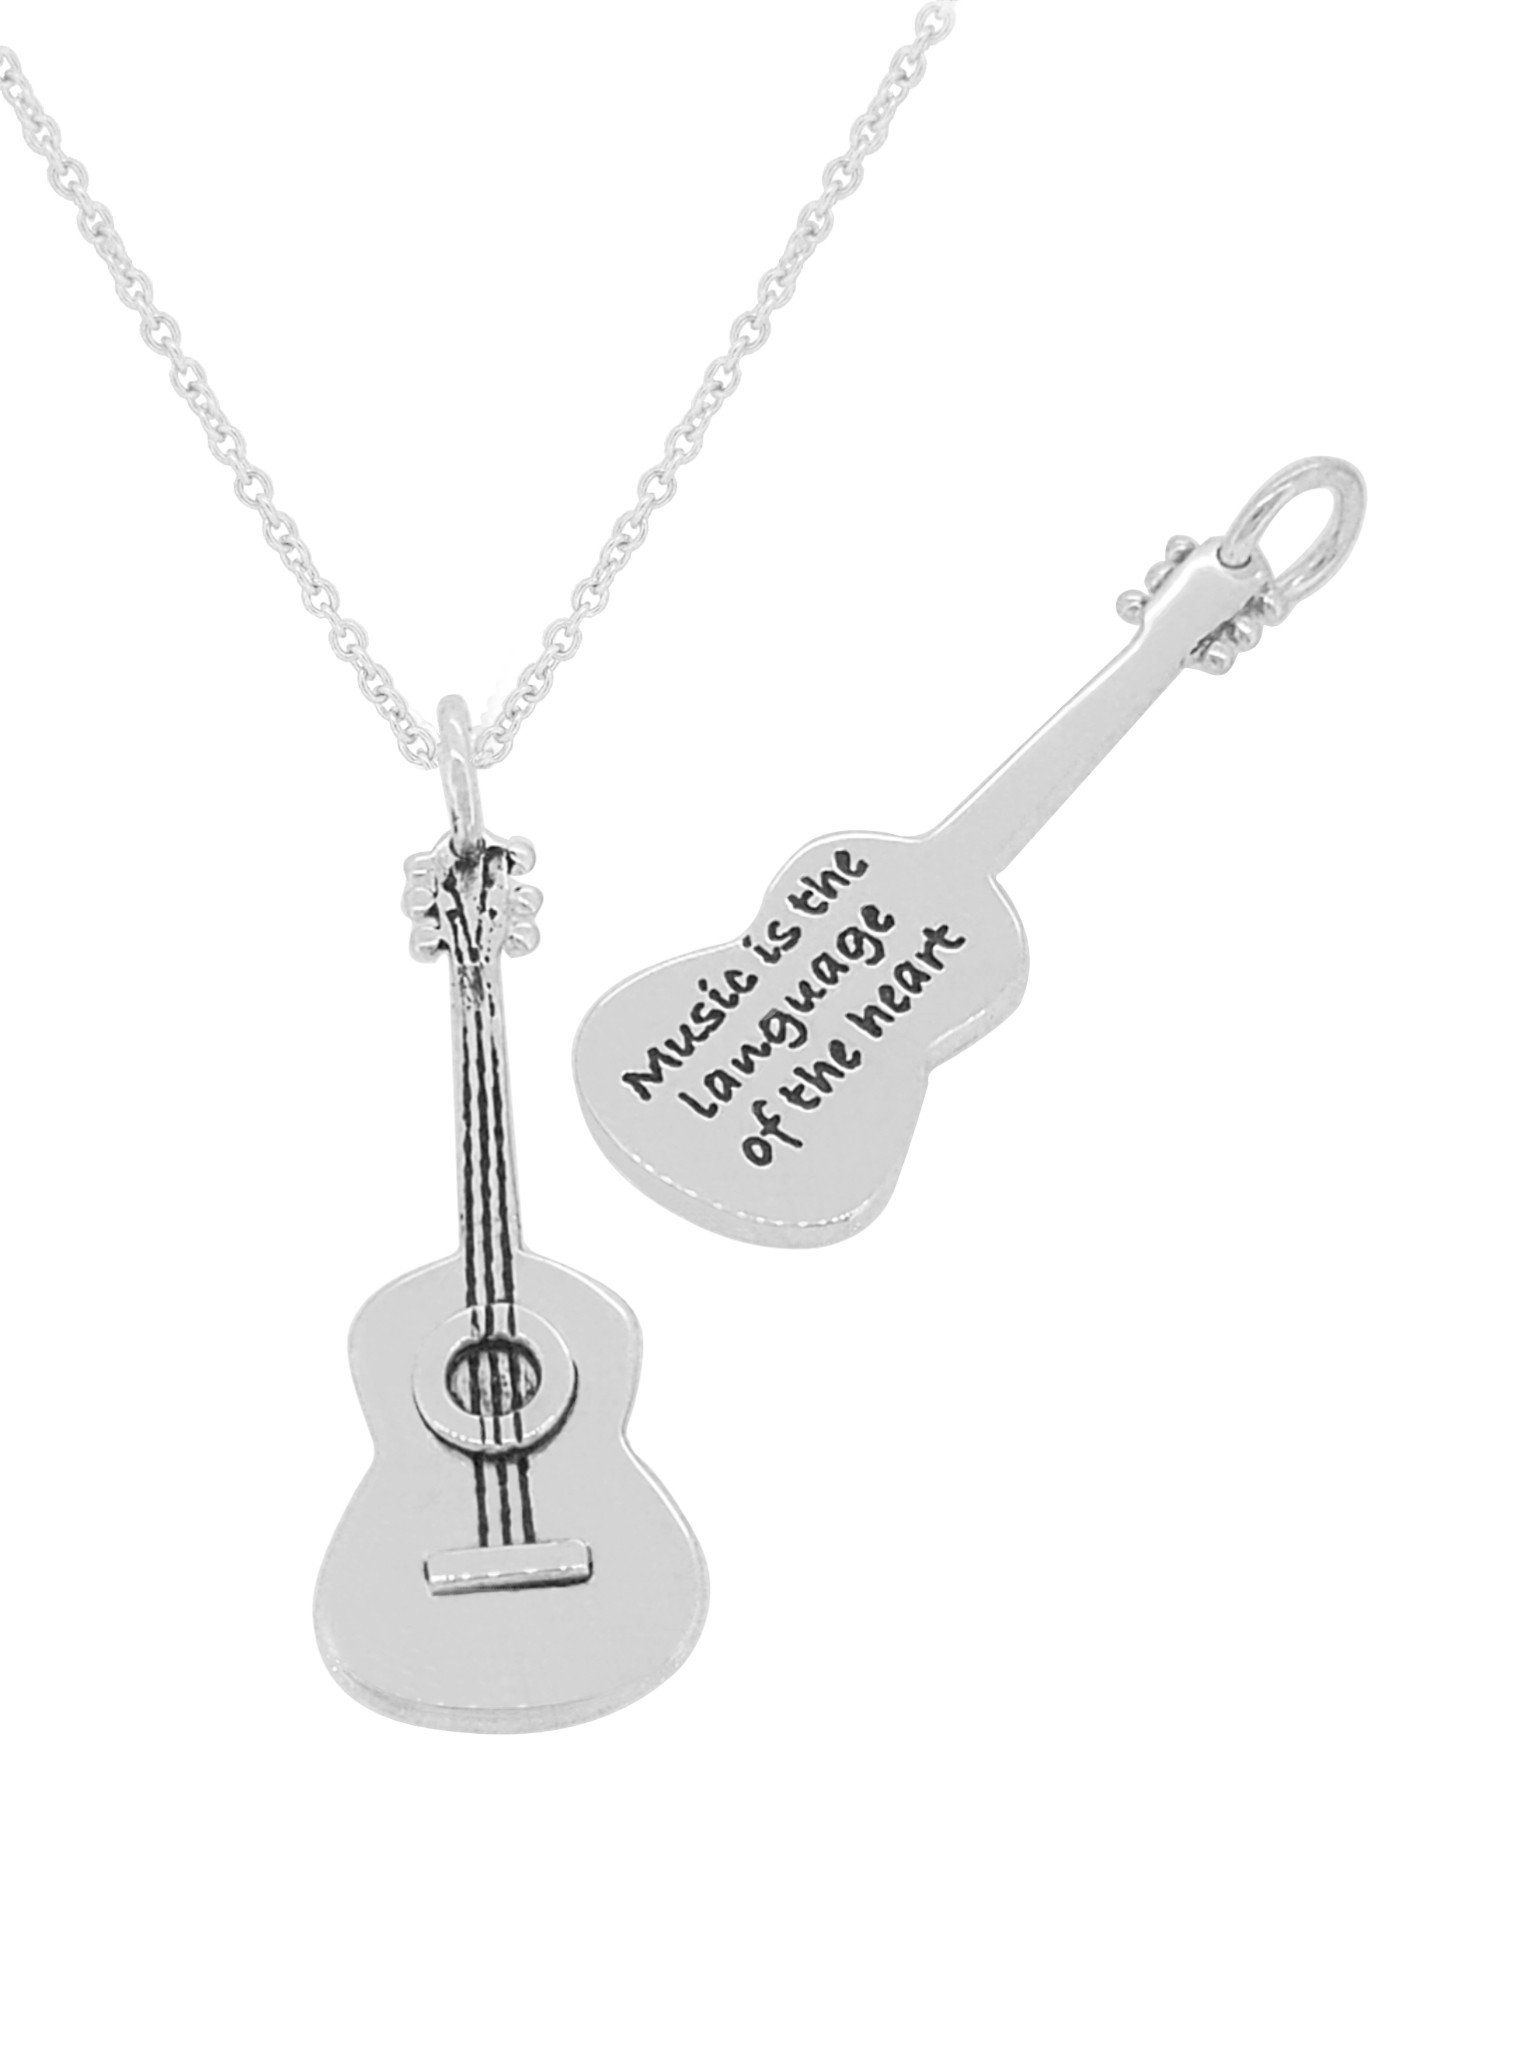 Music Lovers Guitar Charm Necklace in Sterling Silver — The Jewel Shop